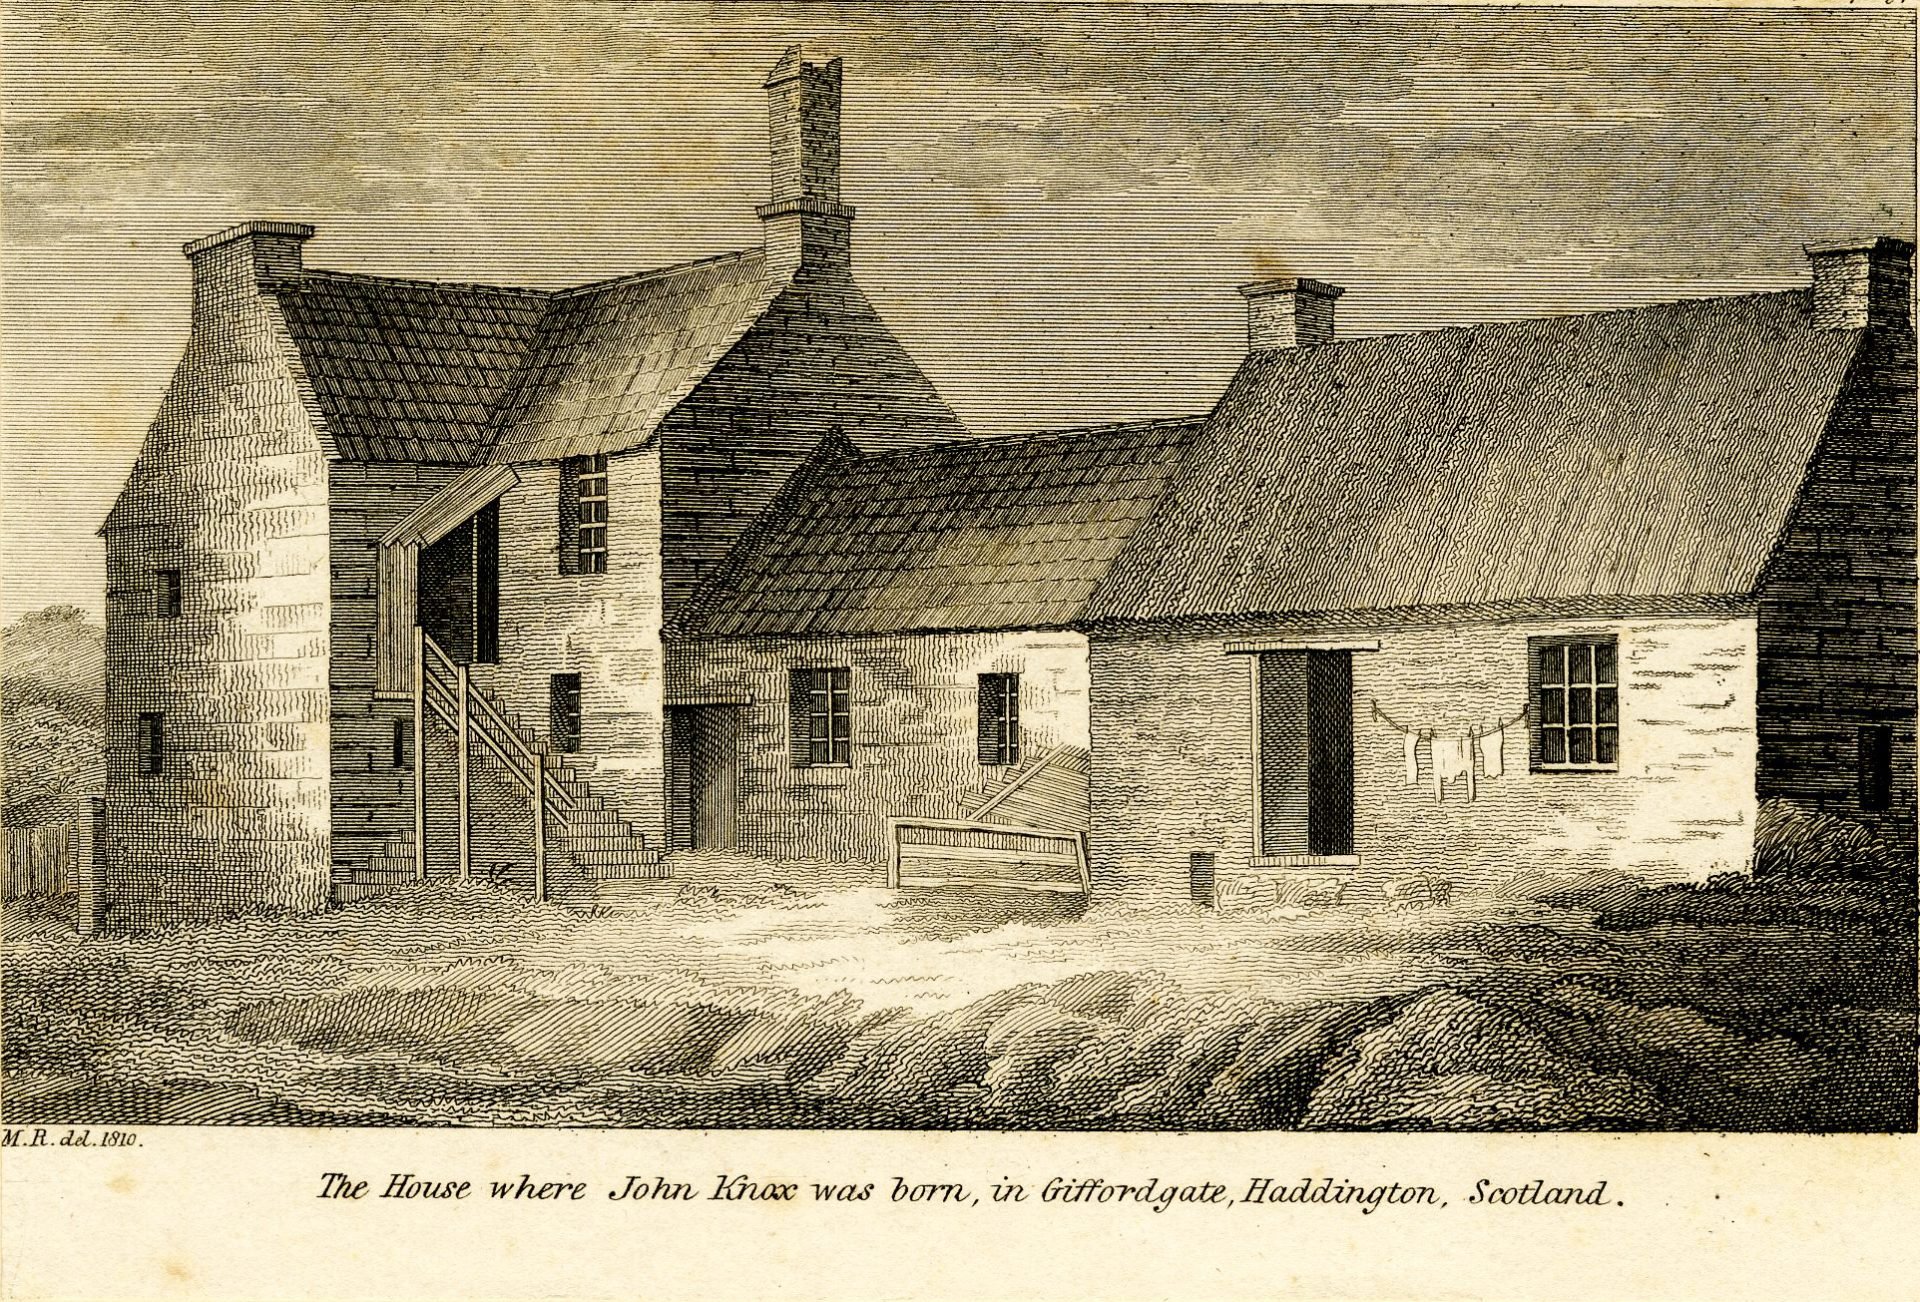 View of the house where Protestant Reformer John Knox was born, steps leading to the entrance on the left, and a line of clothes hanging on a wall between door and window to the right.